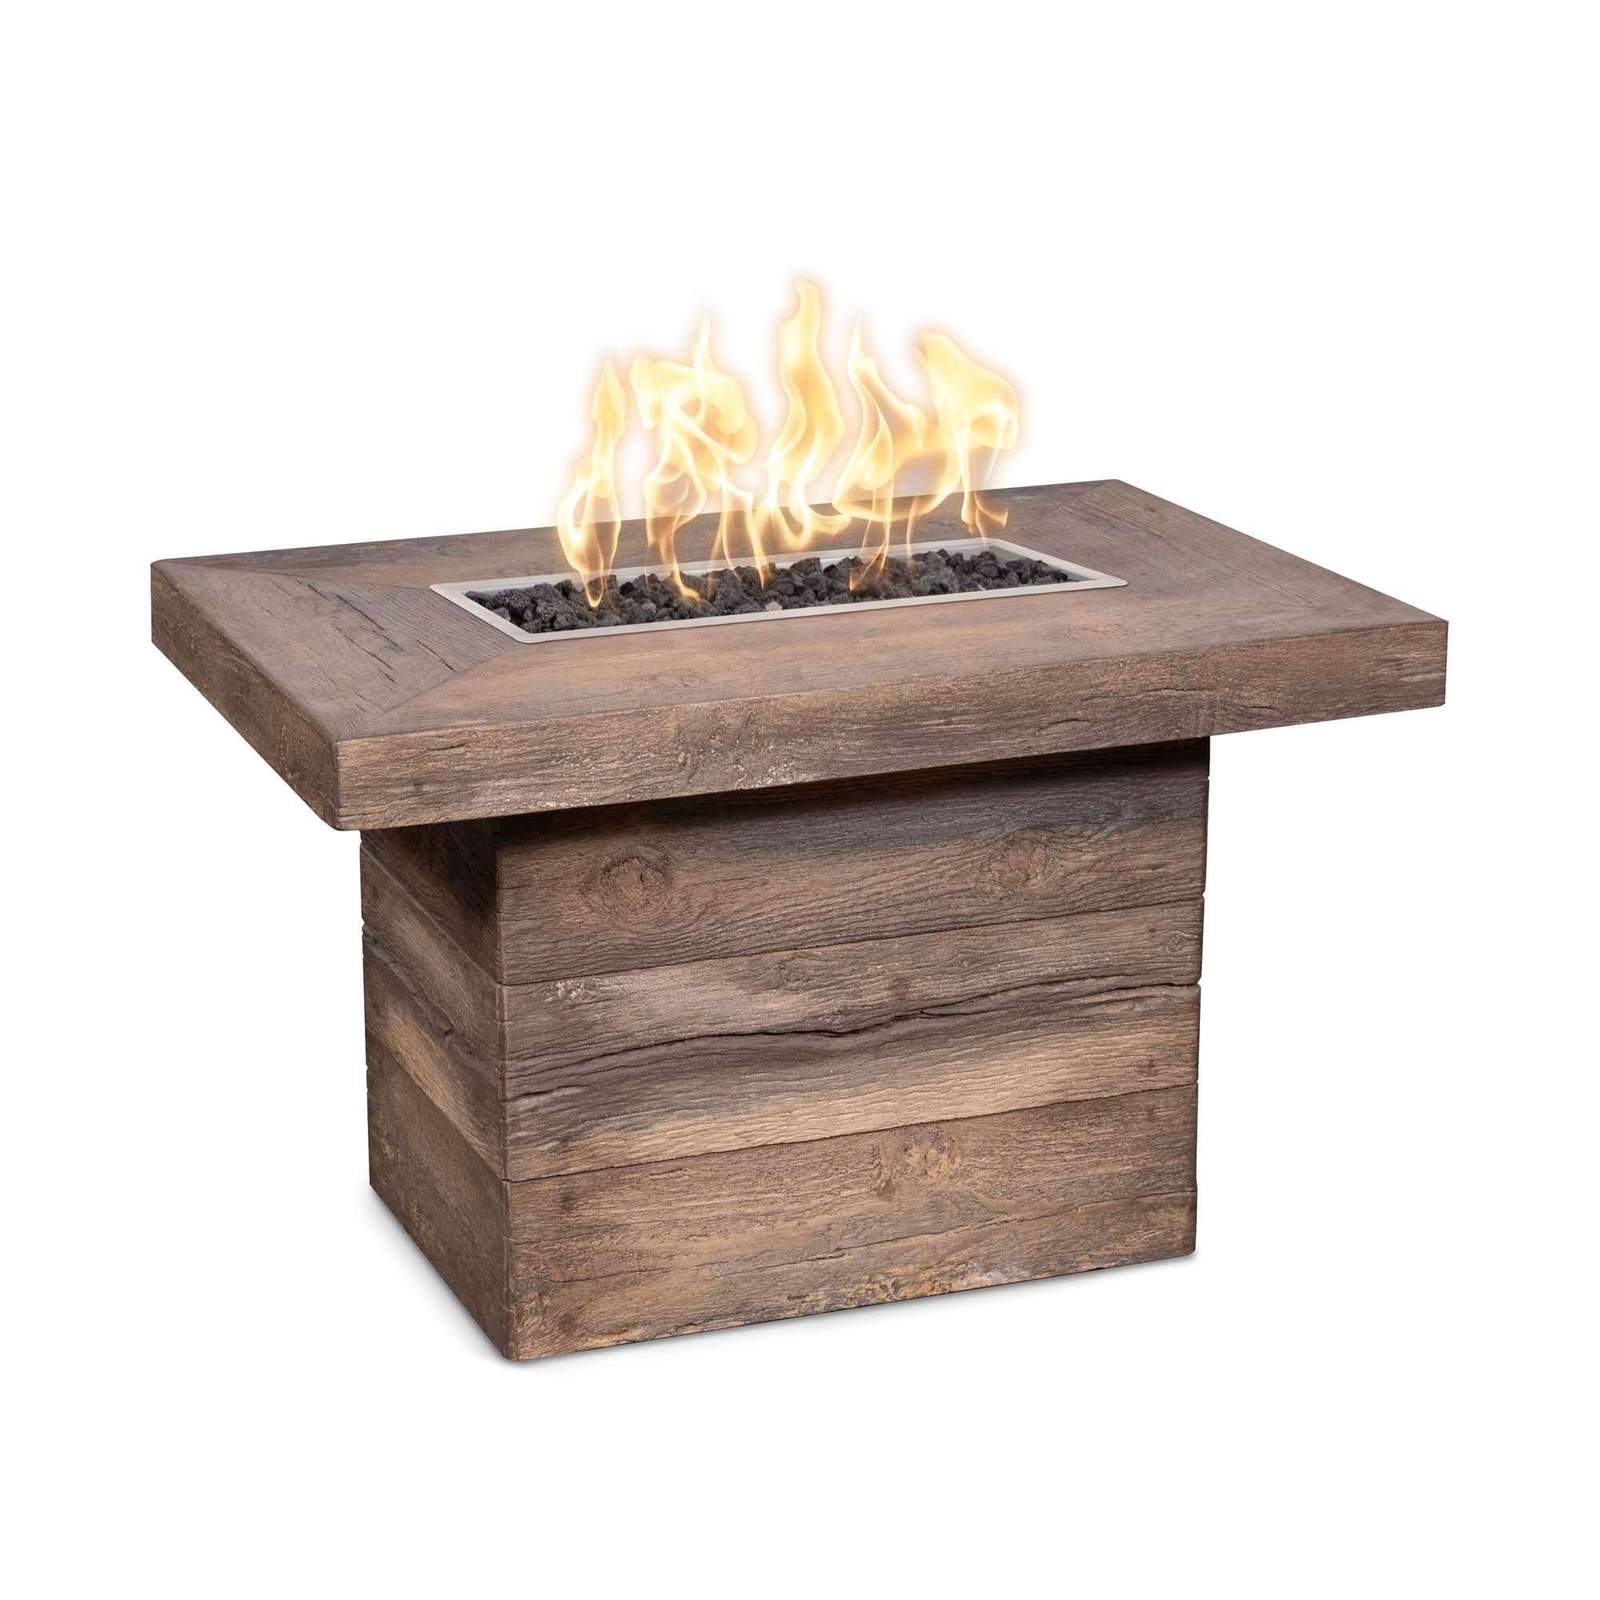 Alberta Fire Pit Wood Grain Concrete 36 by The Outdoor Plus – 110V Plug & Play Electronic Ignition